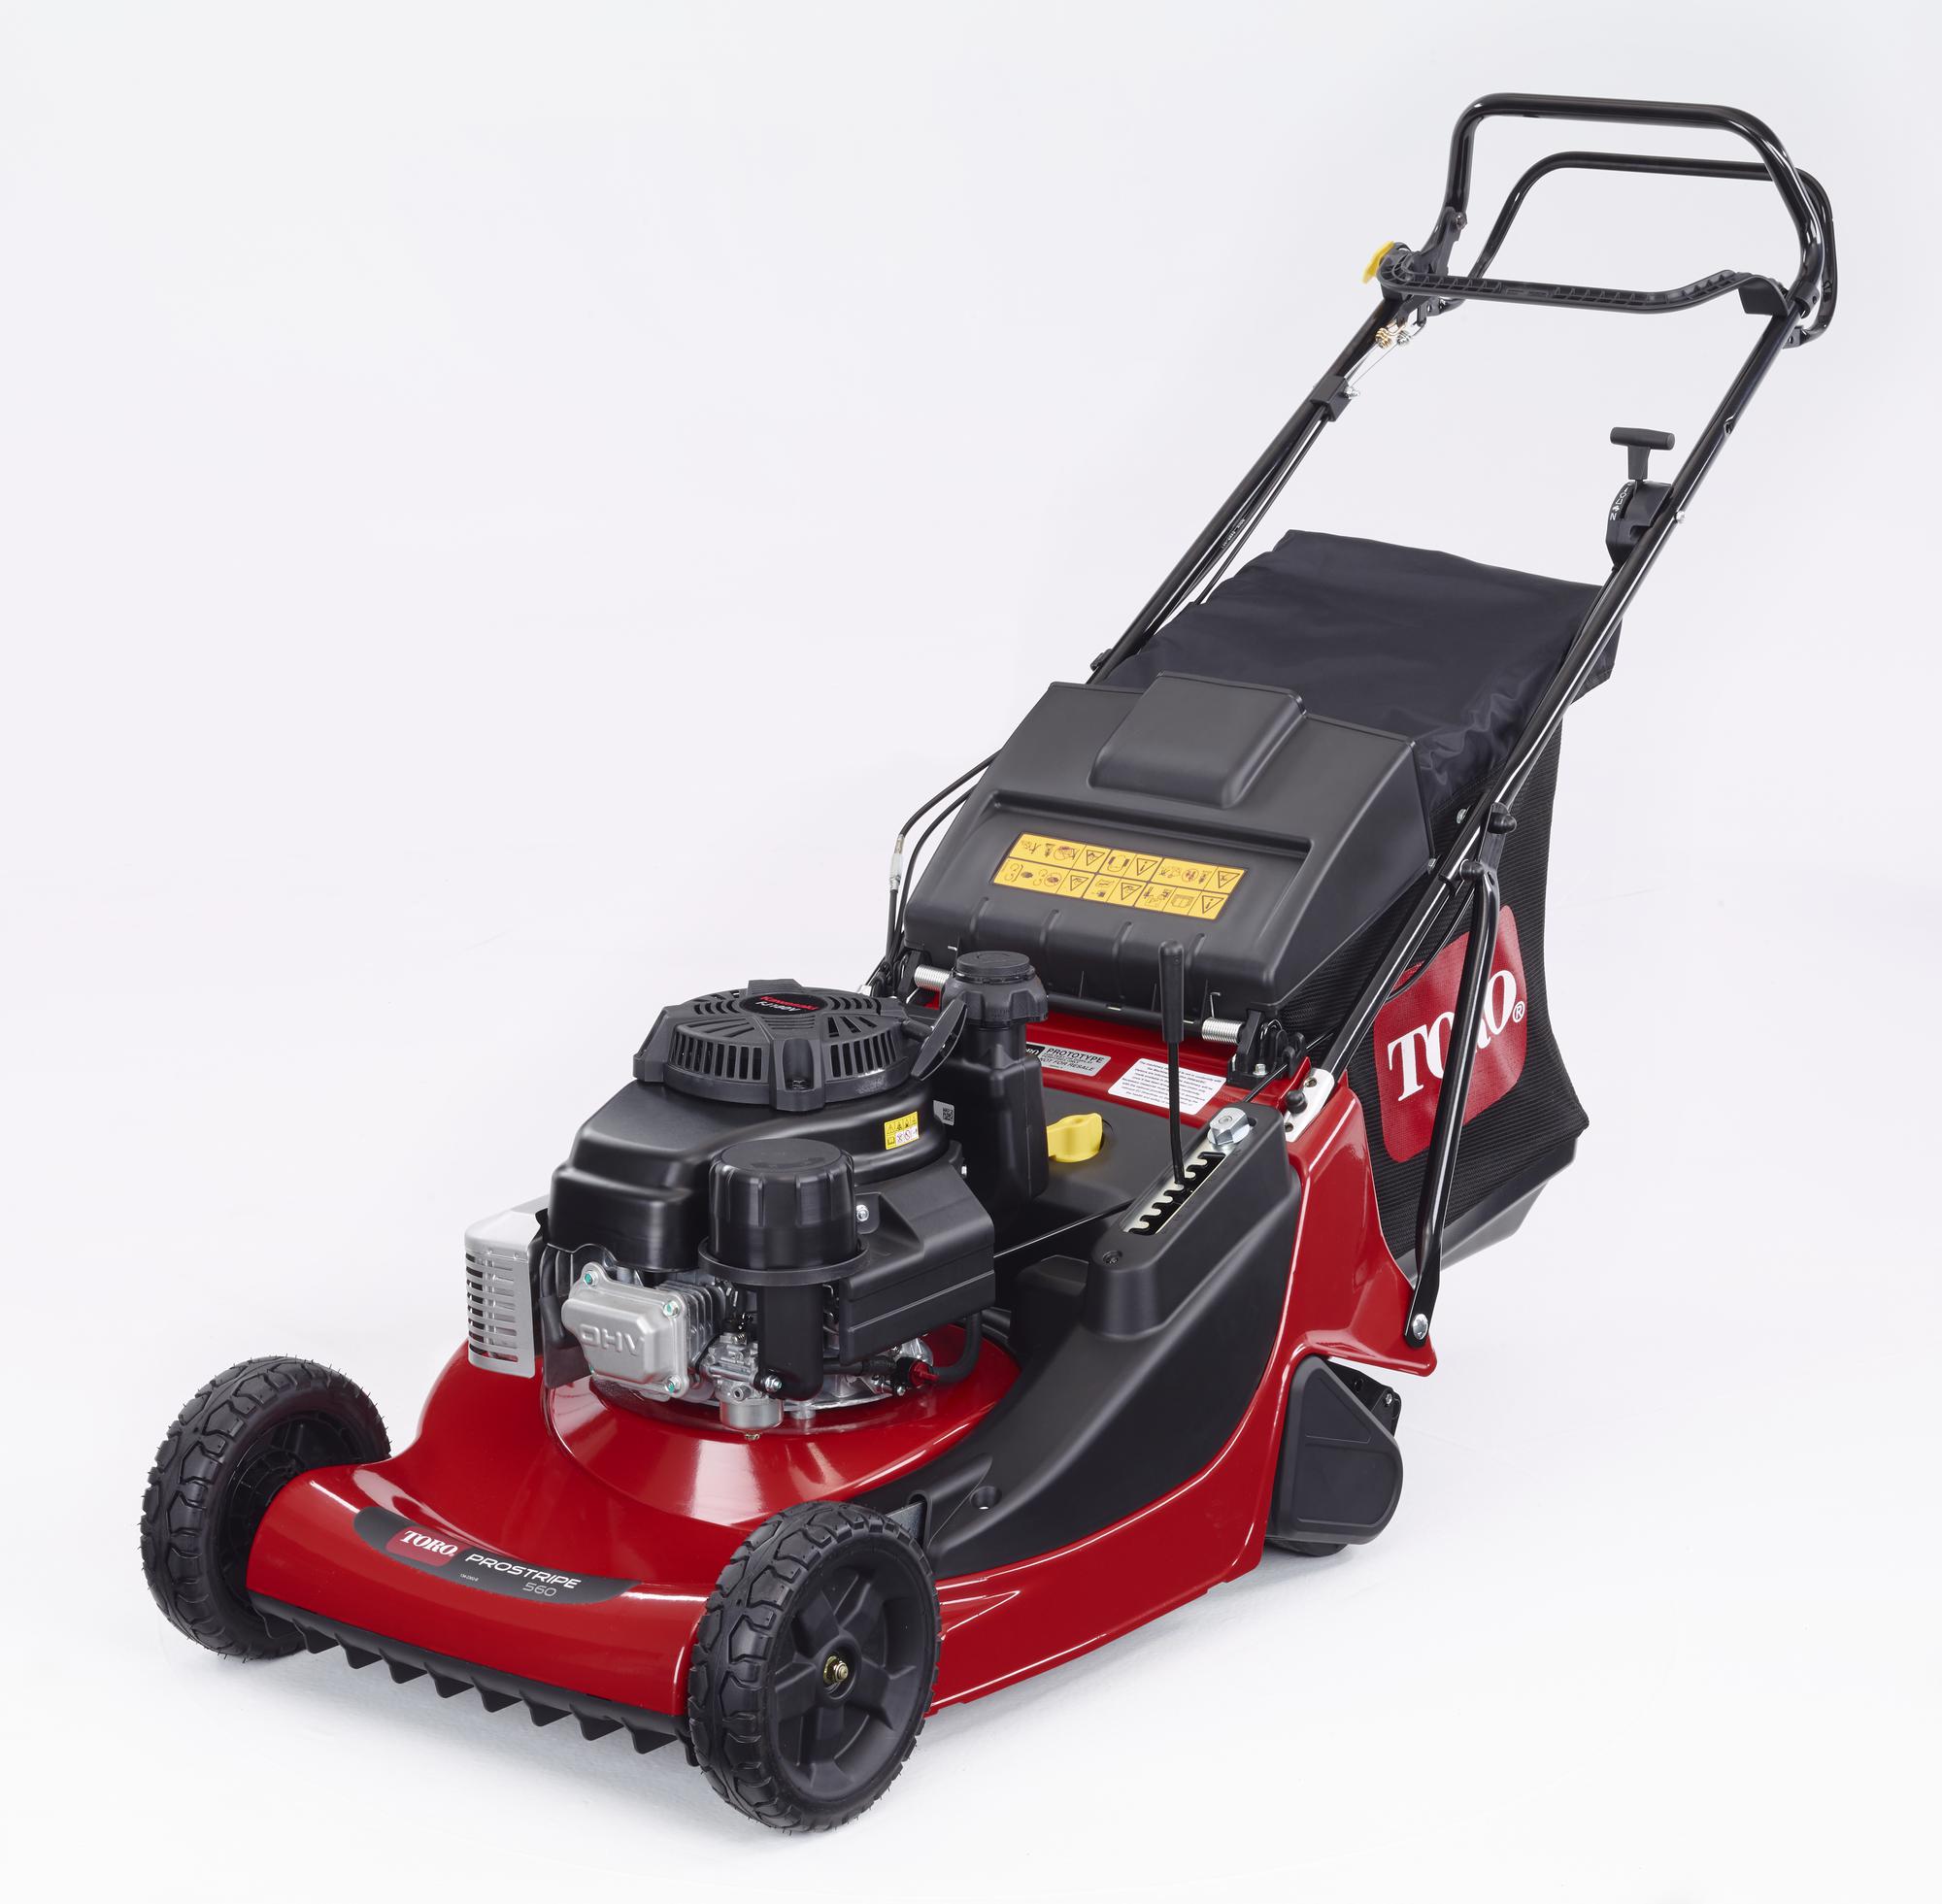 The new Toro ProStripe 560 mower provides both quality of cut and a clean striped finish